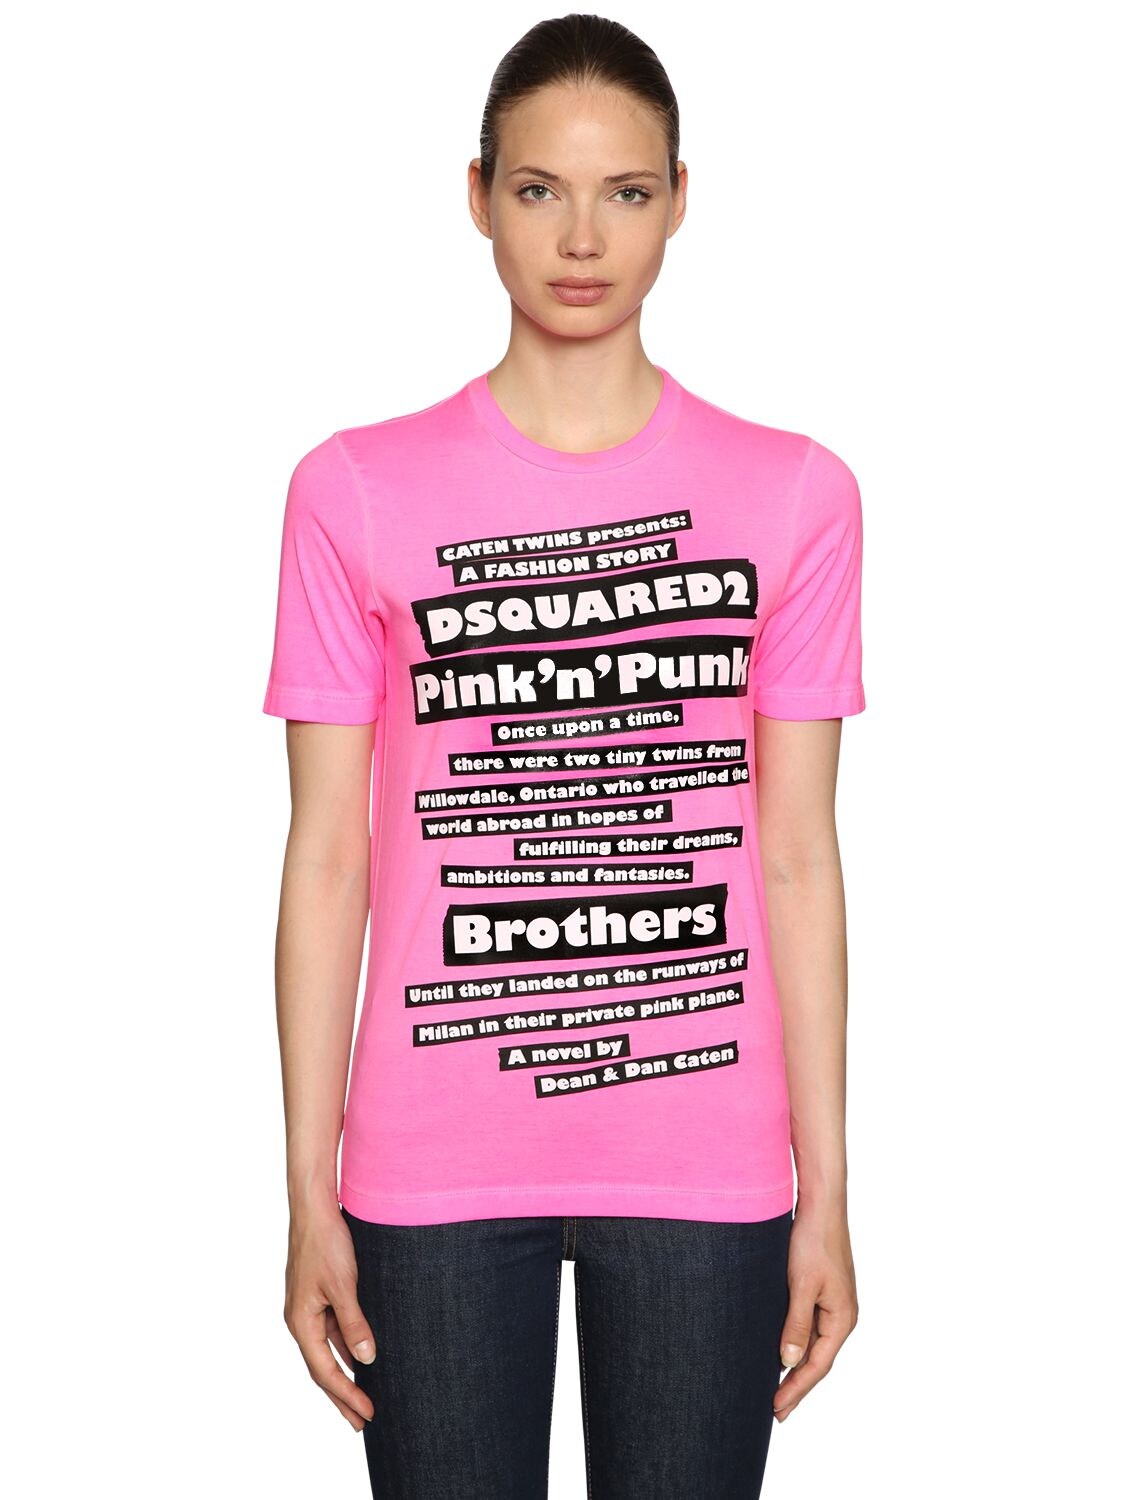 dsquared t shirt pink